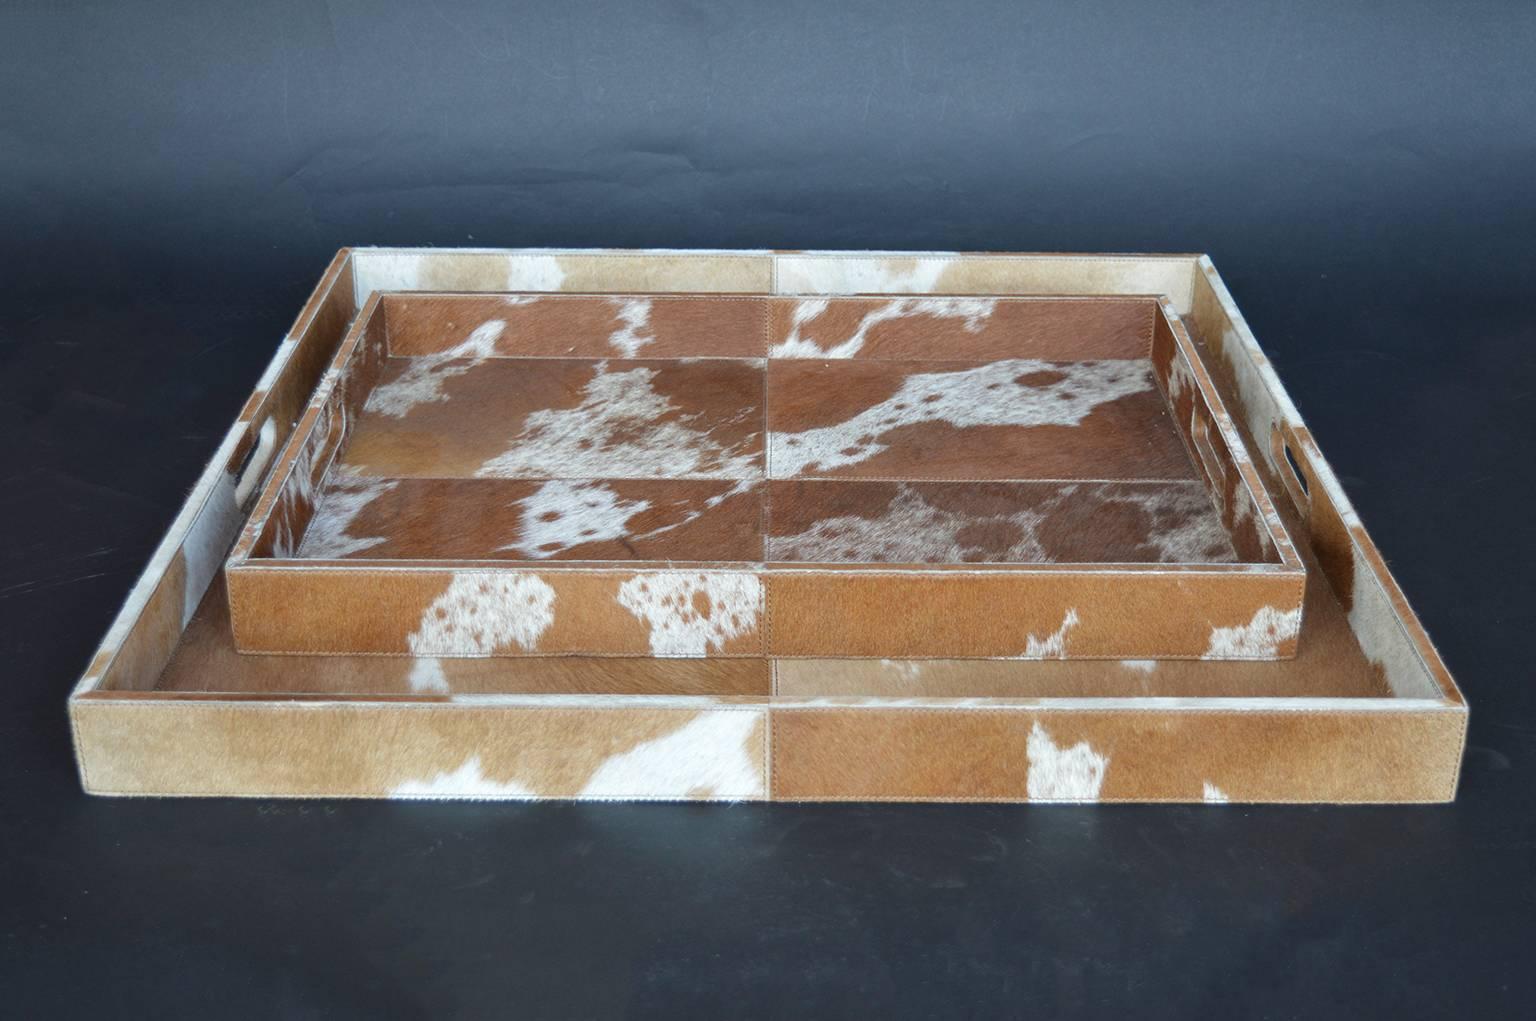 Set of two cowhide trays. Smaller tray measures 18